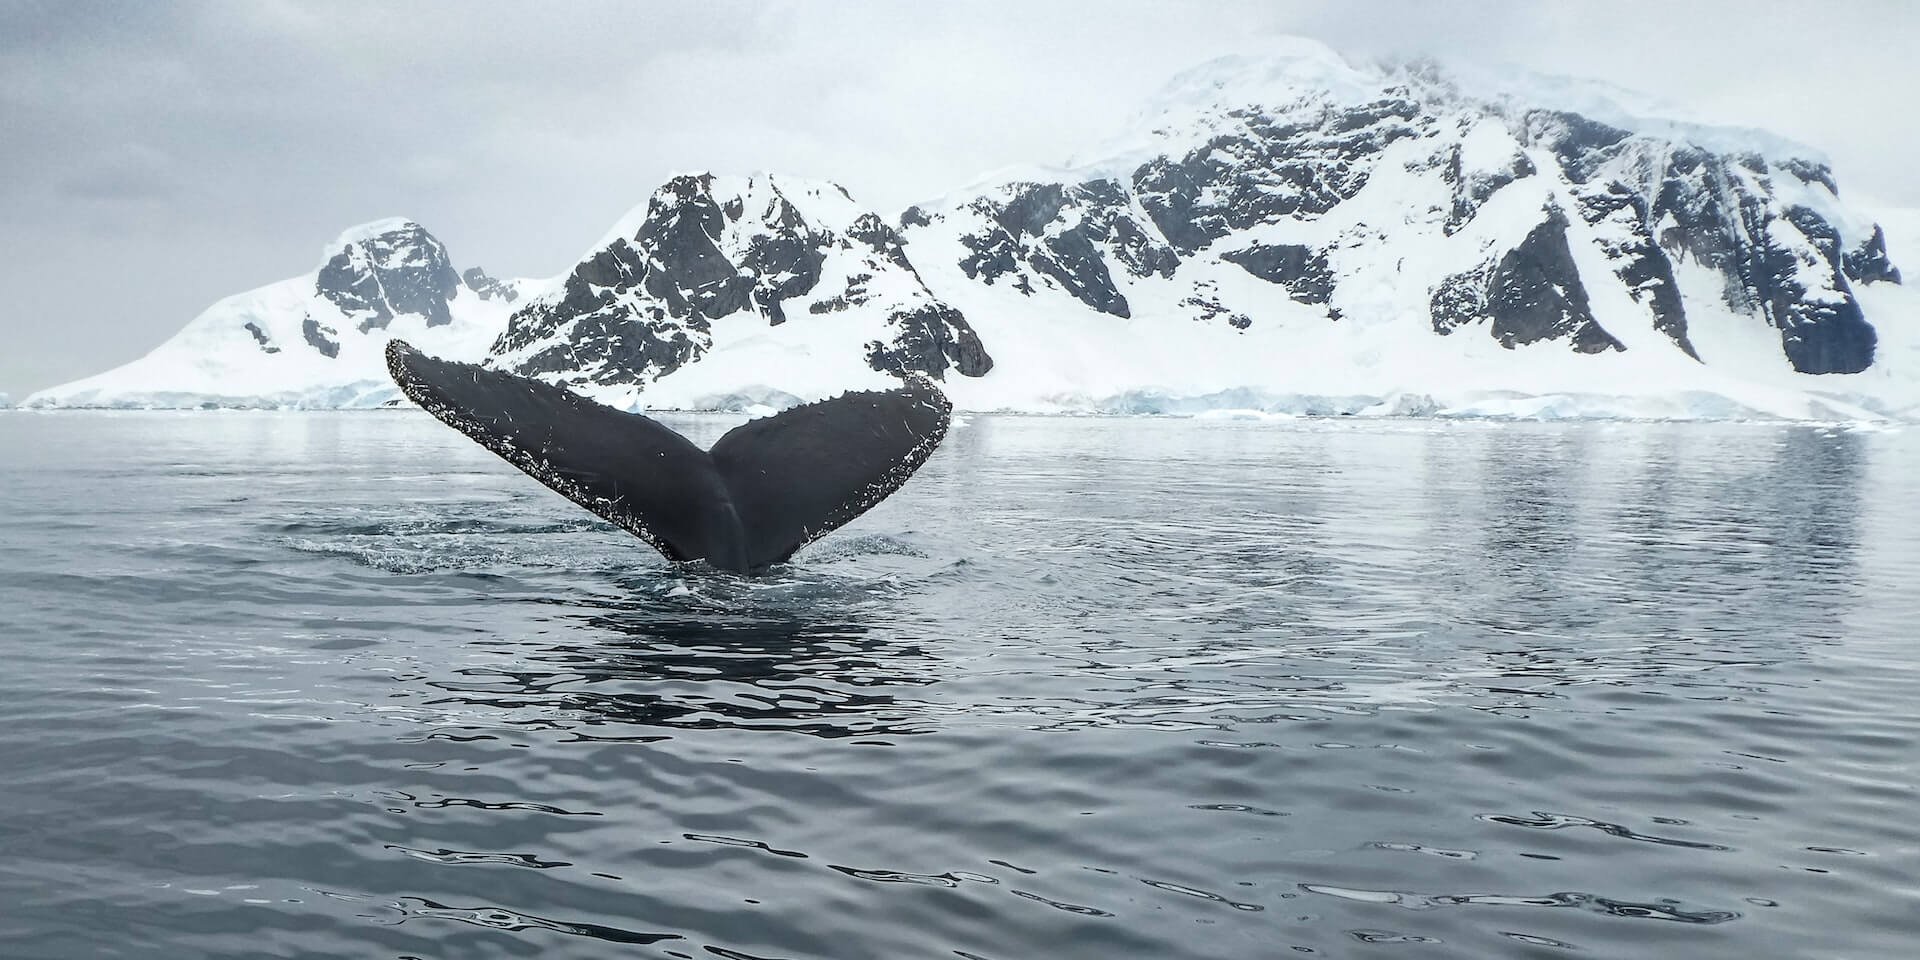 Humpback whale flukes as it dives in Fournier Bay off Anvers Island (Antarctic Peninsula)